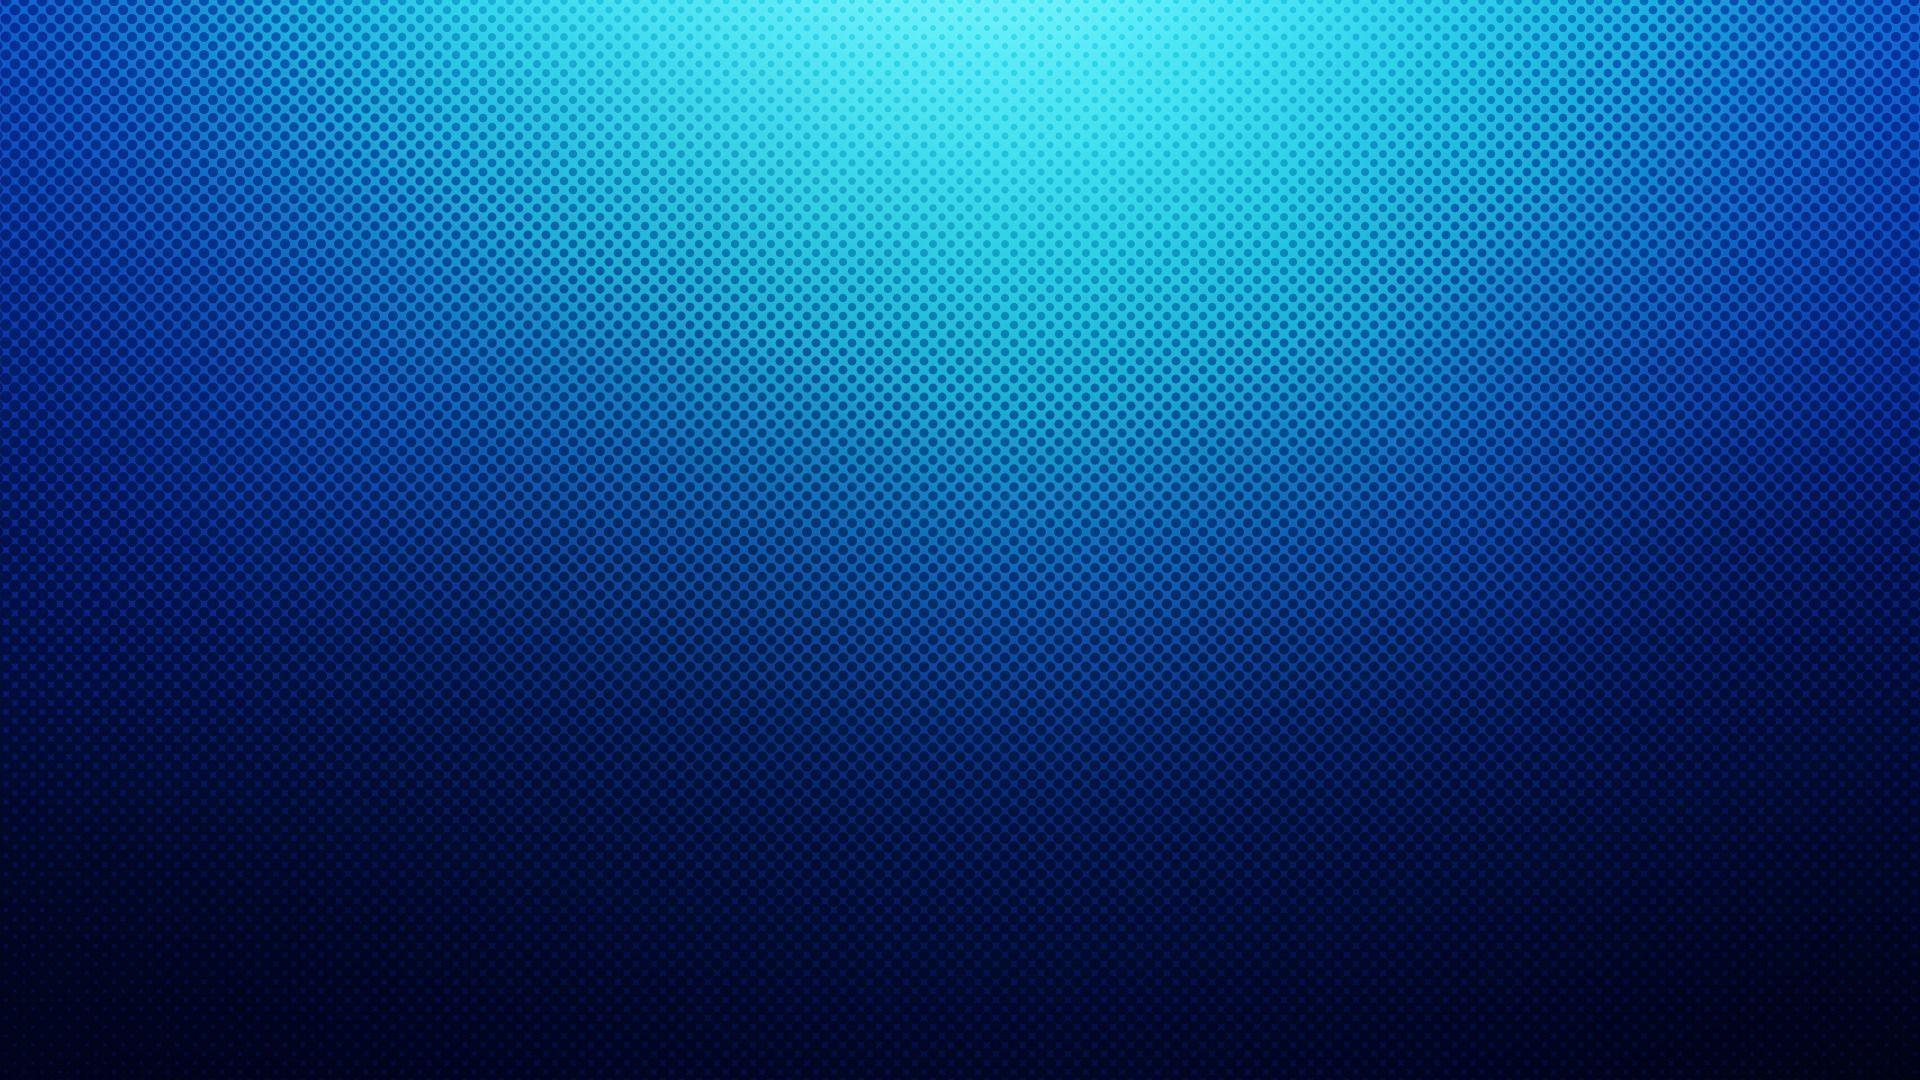 Blue Abstract Wallpaper Wide For Free Wallpaper in 2019